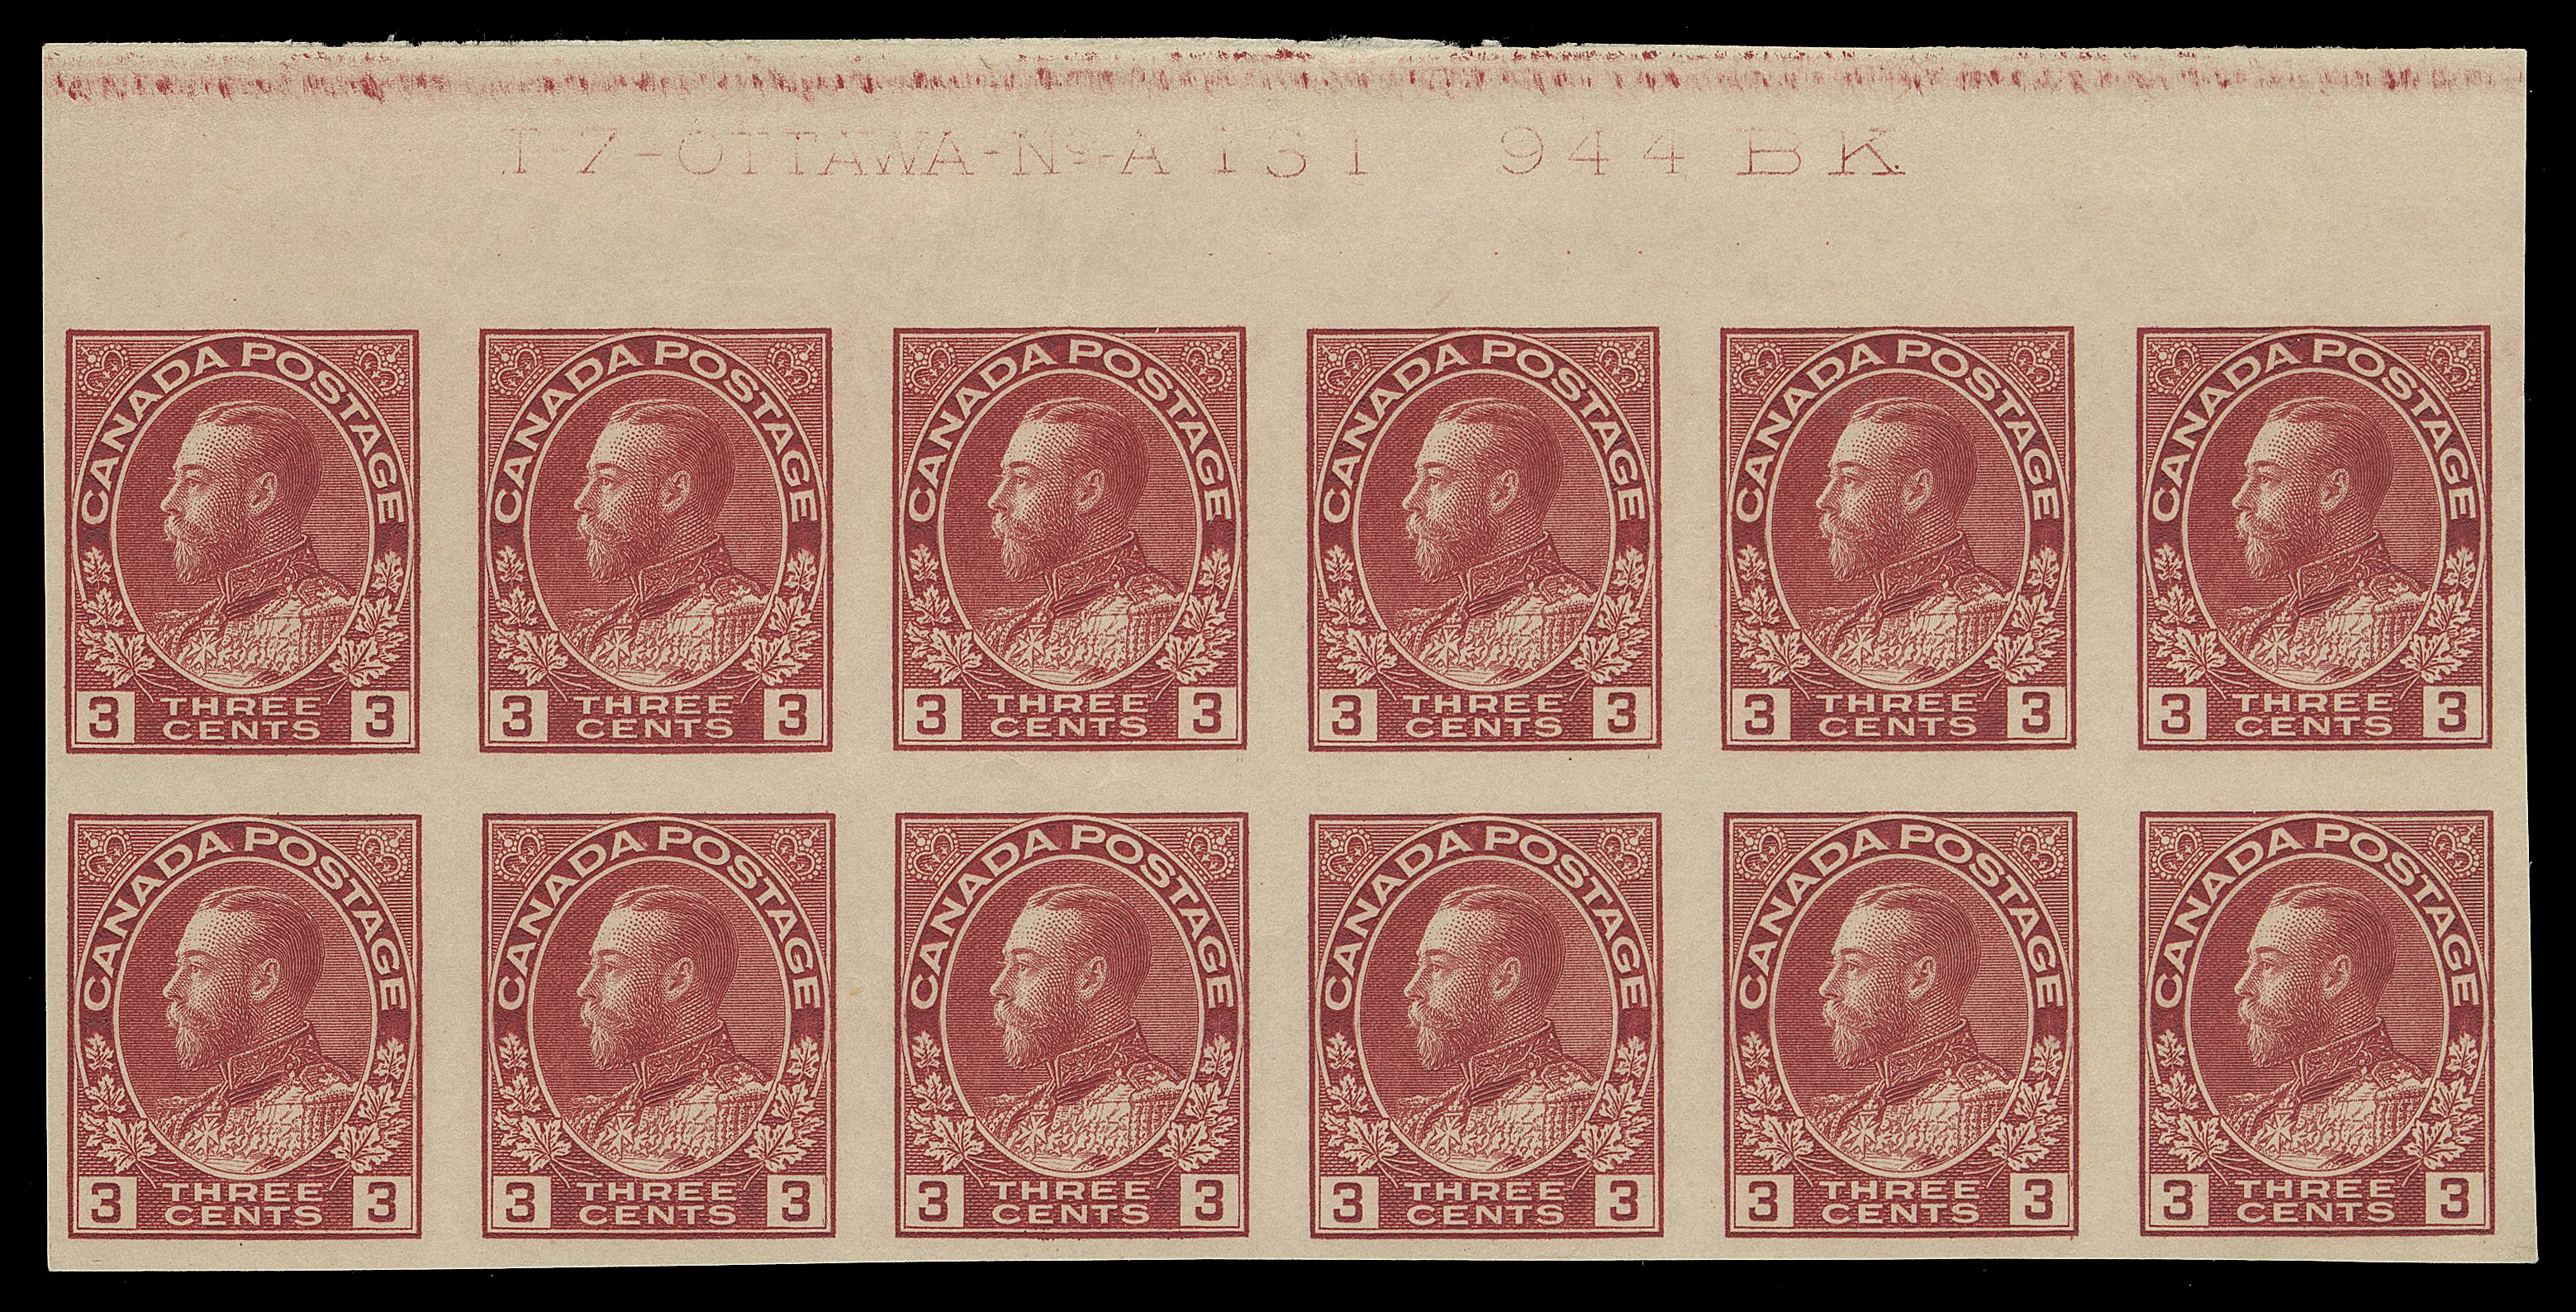 ADMIRAL STAMPS  138,A very rare Plate 131 (not regularly issued) mint Upper Left block of twelve, nice impression of the full plate imprint with band of colour at top edge, hinged in margin and two stamps in top row, other ten stamps NH. Only six plate multiples are reported (four from UL and two from UR panes), VF (Unitrade cat. $3,000 for a hinged block of eight)

Provenance: Ed Richardson, Maresch Sale 101, April 1978; Lot 316

